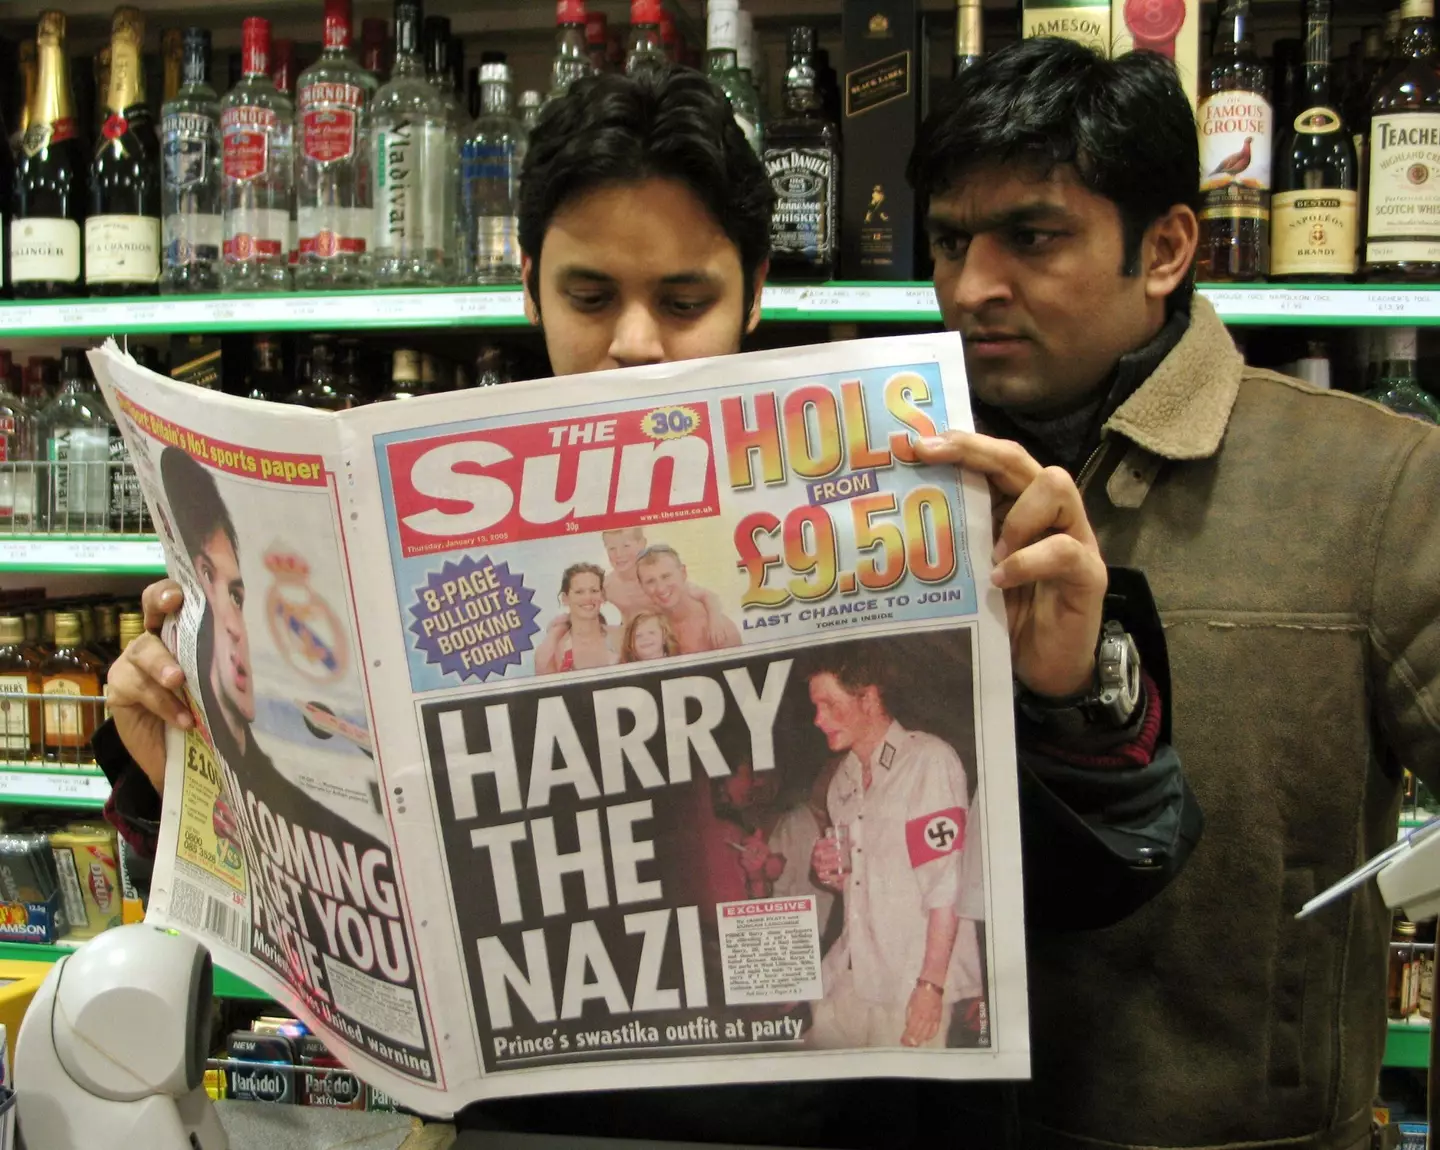 Wearing the Nazi outfit, Prince Harry made the front page of The Sun.